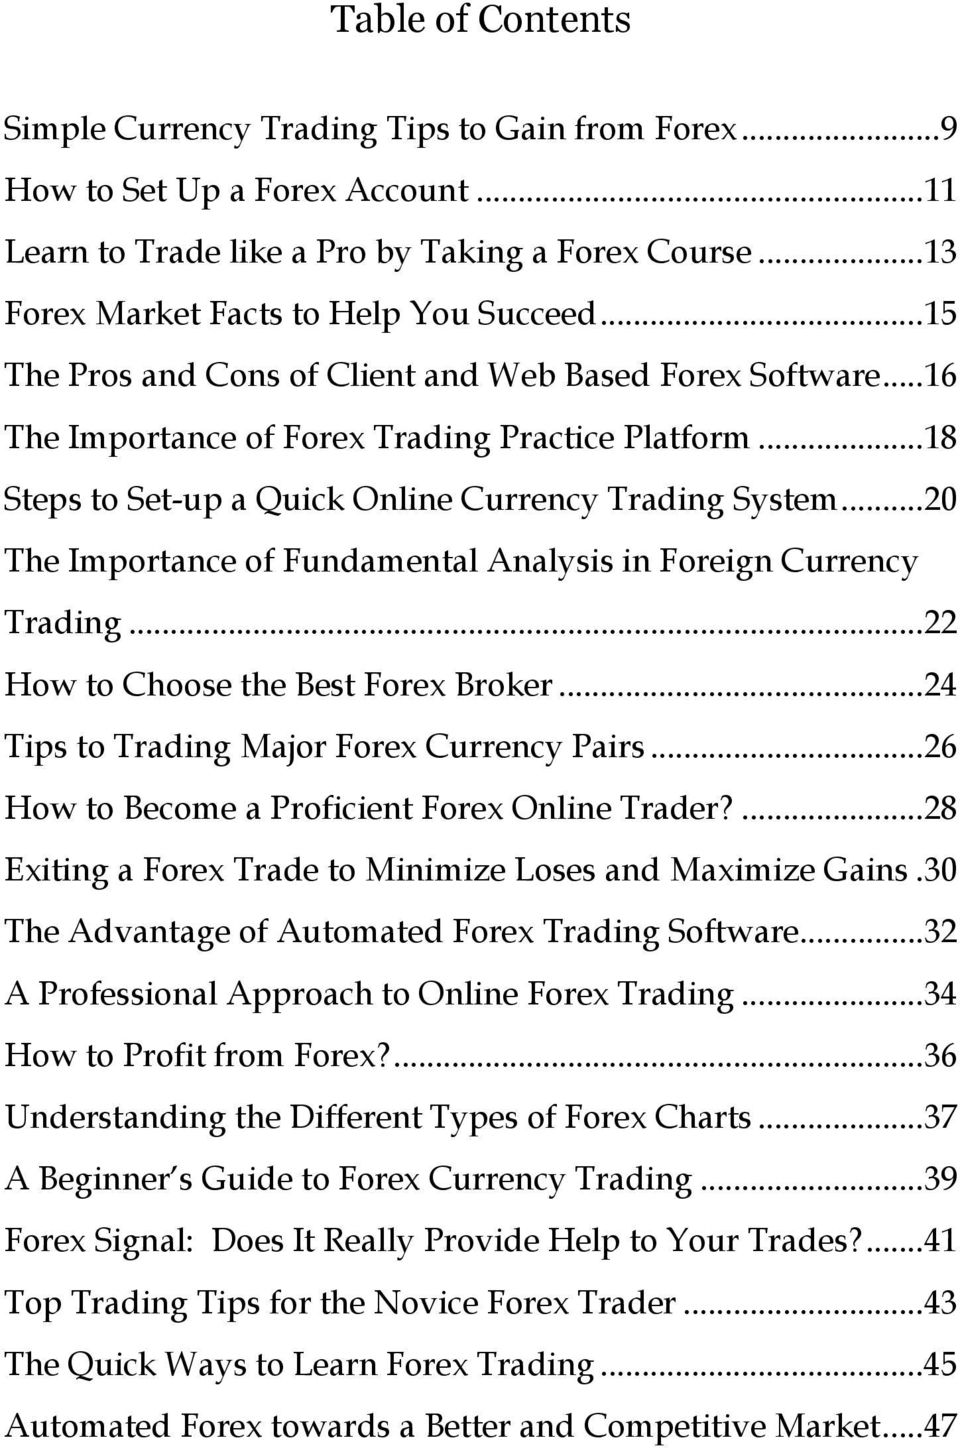 ..20 The Importance of Fundamental Analysis in Foreign Currency Trading...22 How to Choose the Best Forex Broker...24 Tips to Trading Major Forex Currency Pairs.